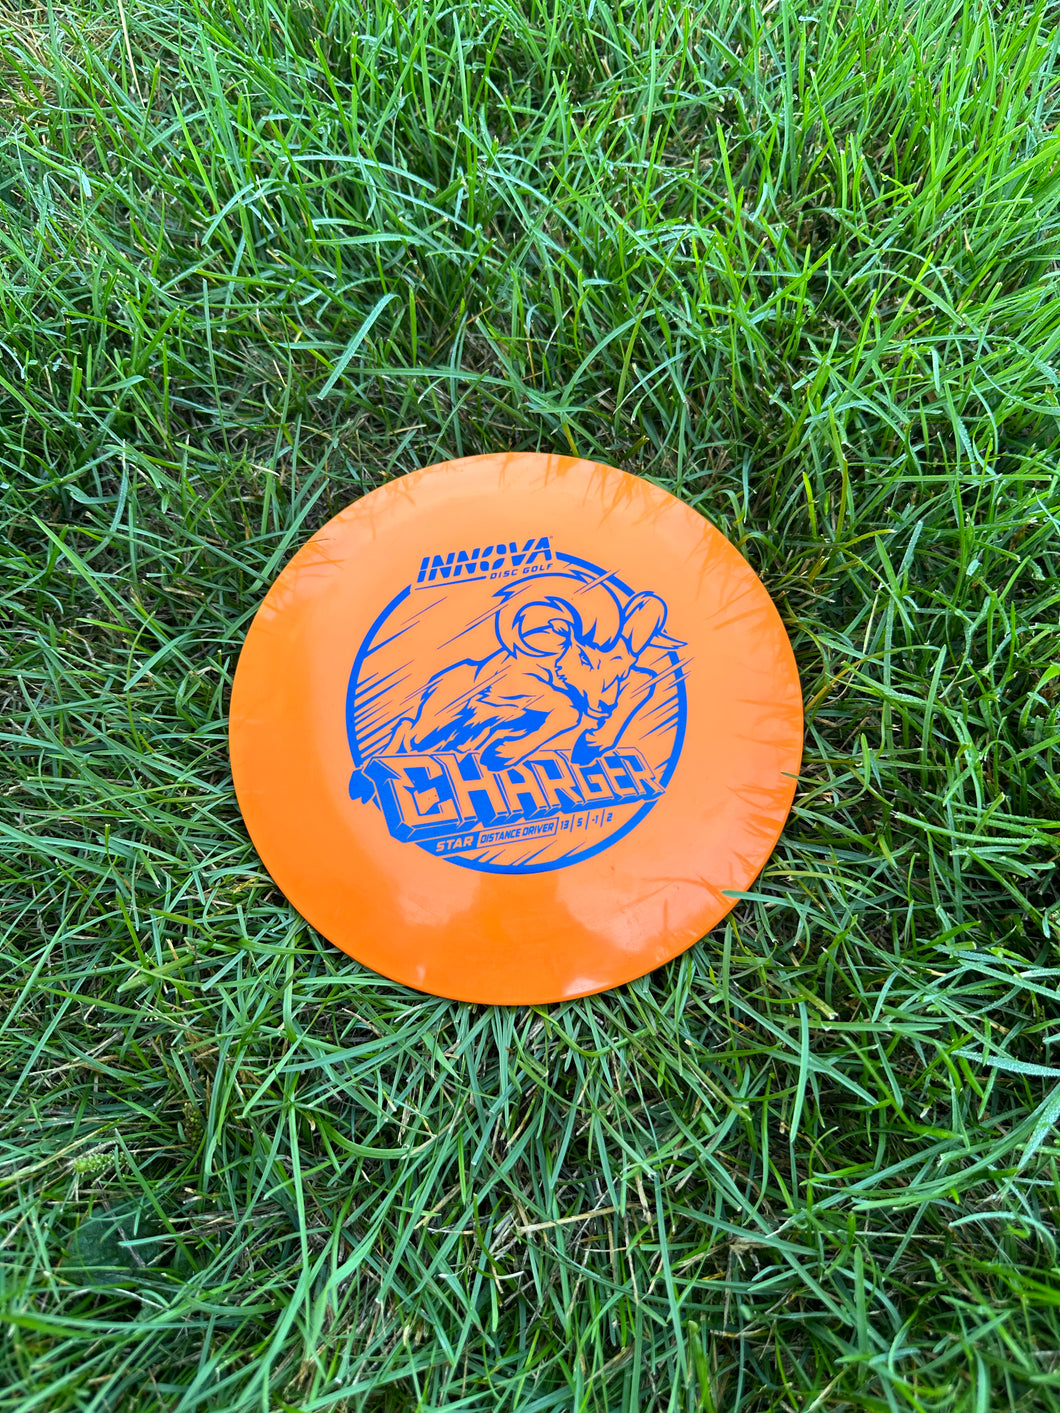 Innova charger distance driver